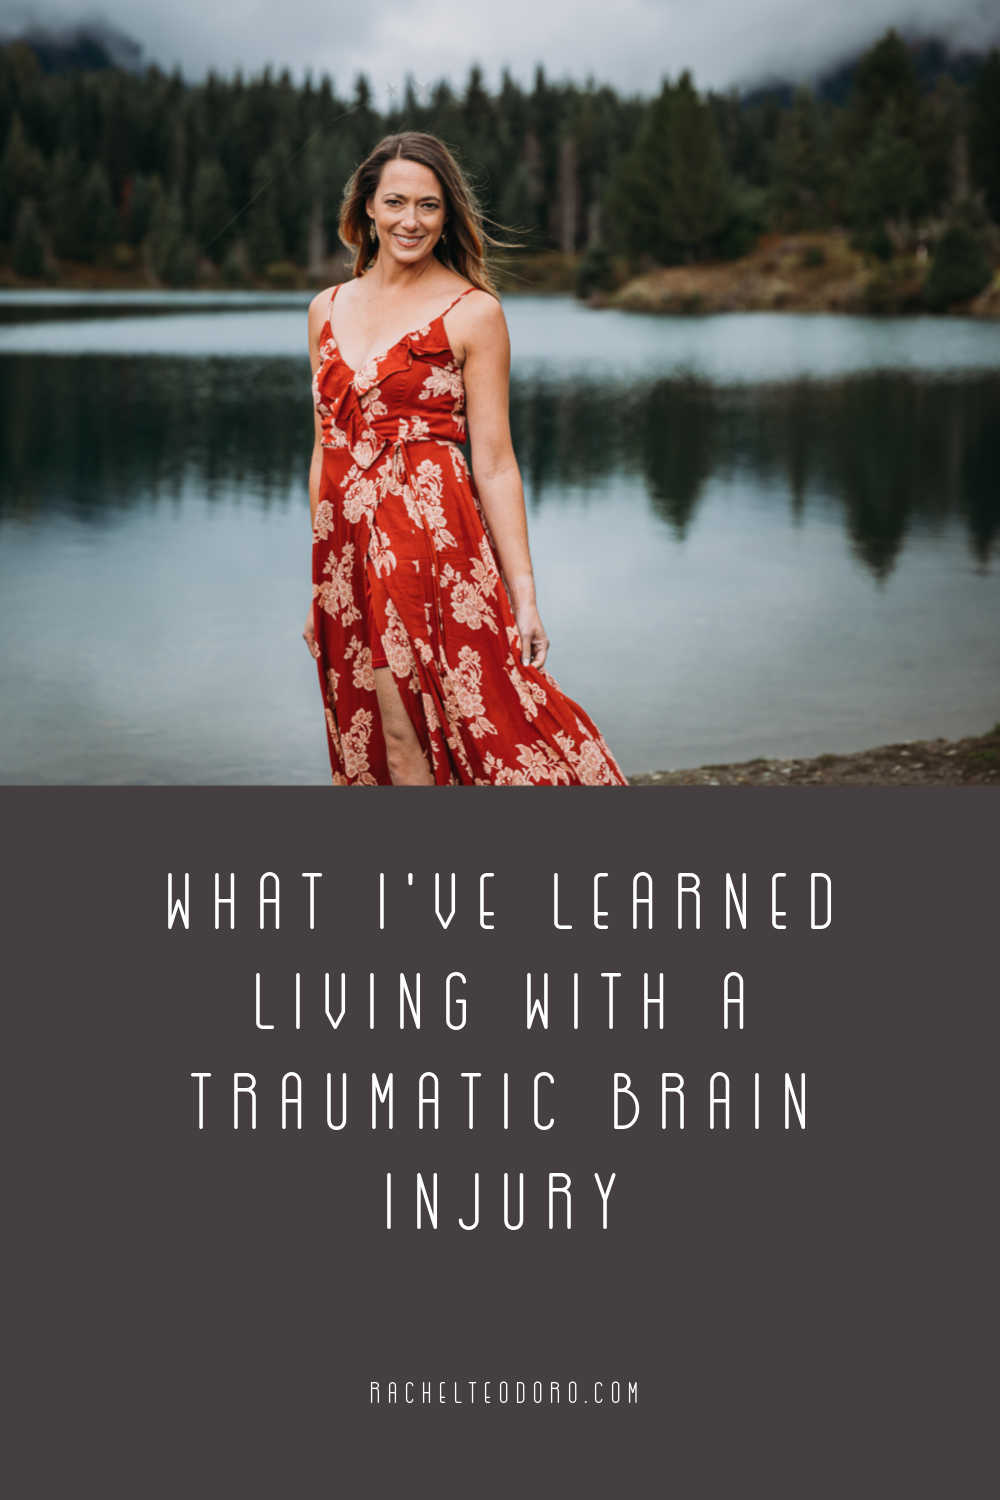 LESSONS LEARNED FROM TBI